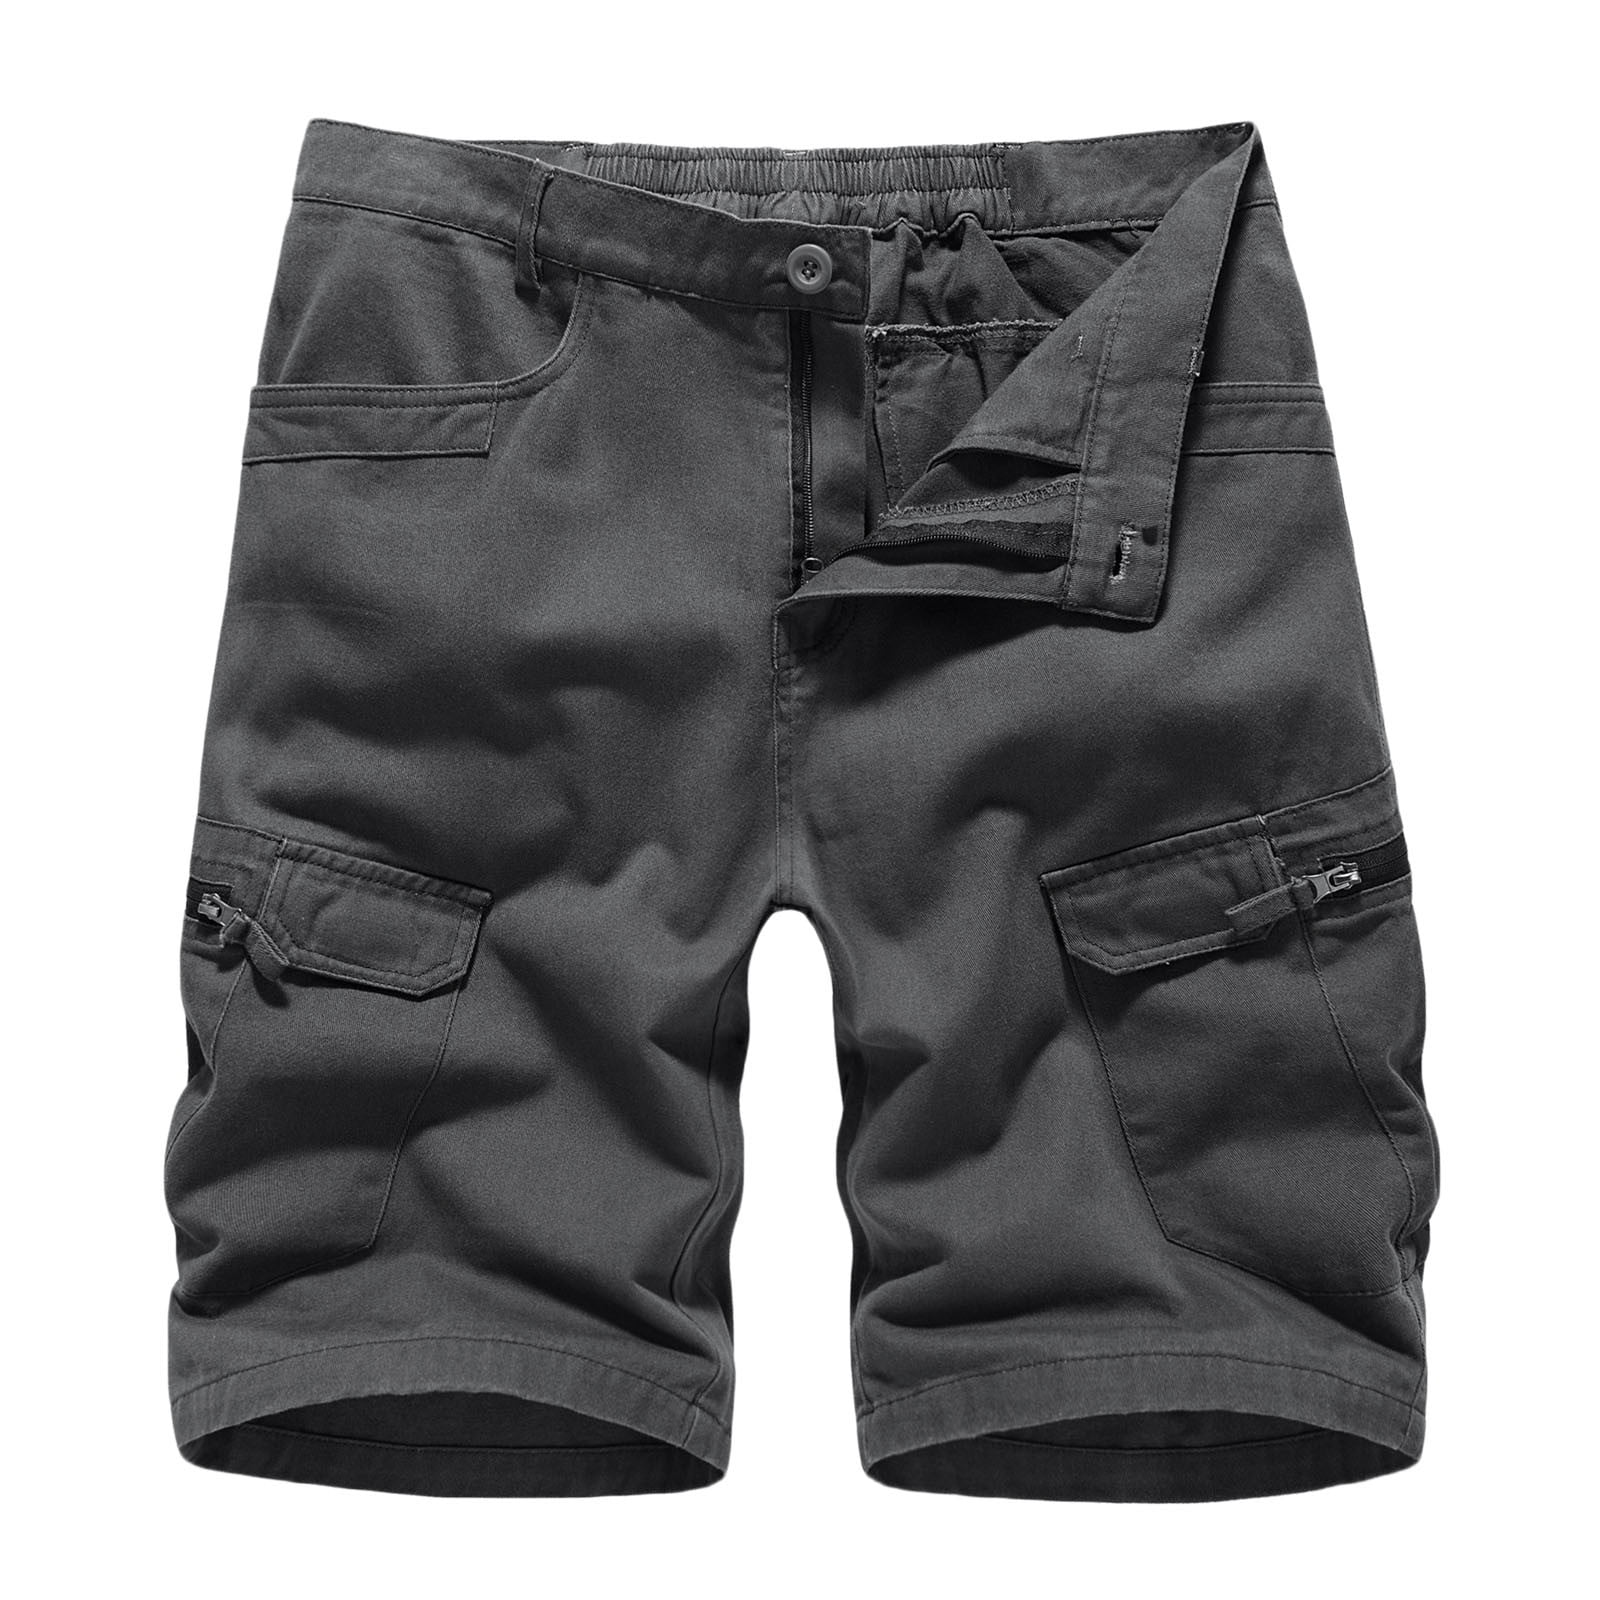 cllios Cargo Shorts for Men Relaxed Fit Multi Pockets Shorts Outdoor ...